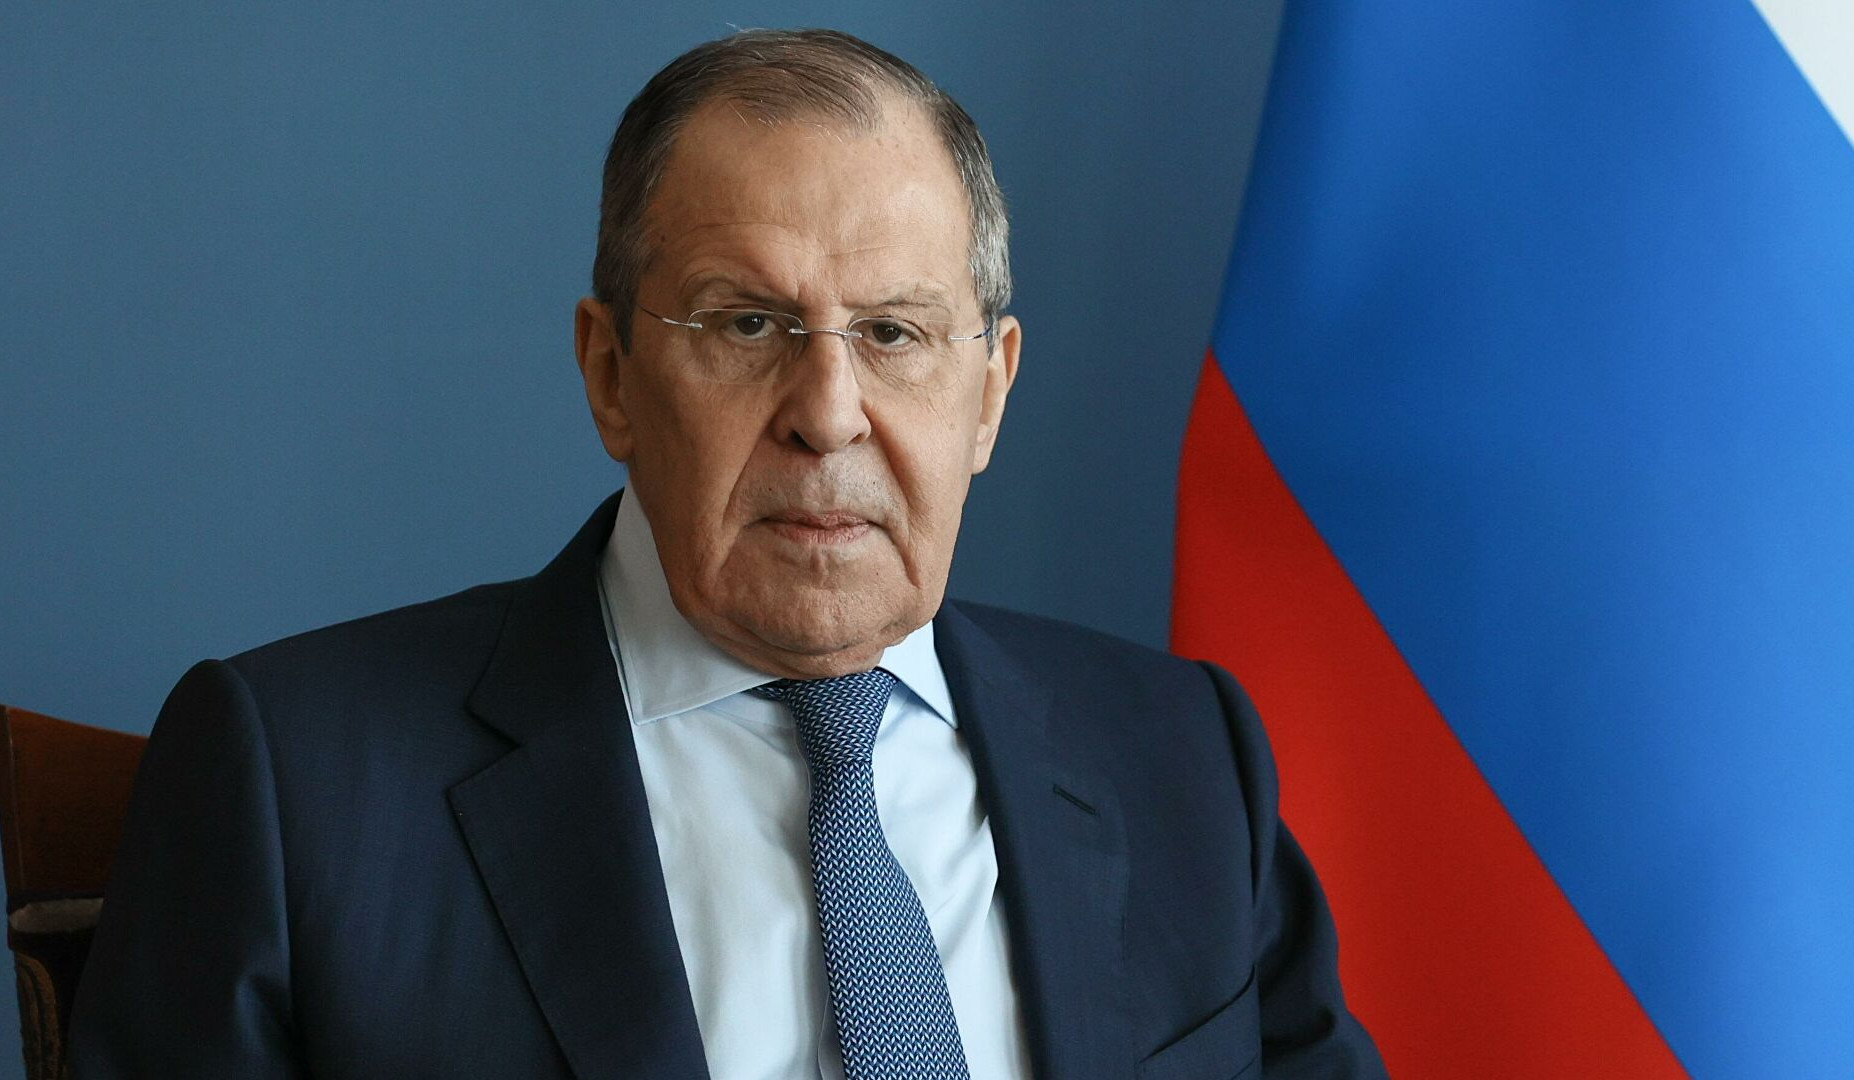 Lavrov expressed hope that special operation in Ukraine will end with signing of comprehensive documents